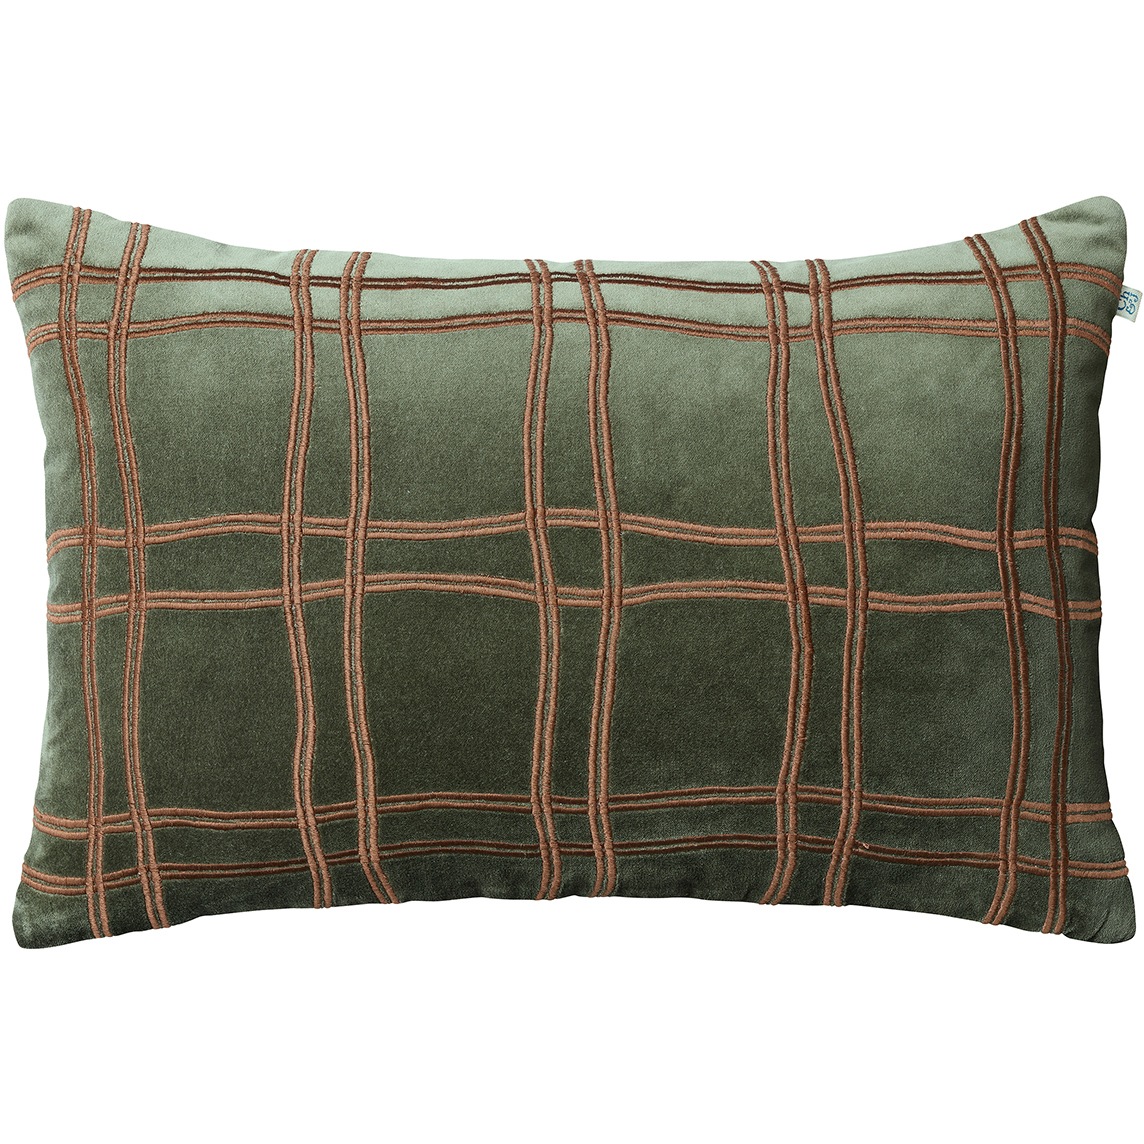 Tattersall Cushion Cover 40x60 cm, Forest Green / Cognac